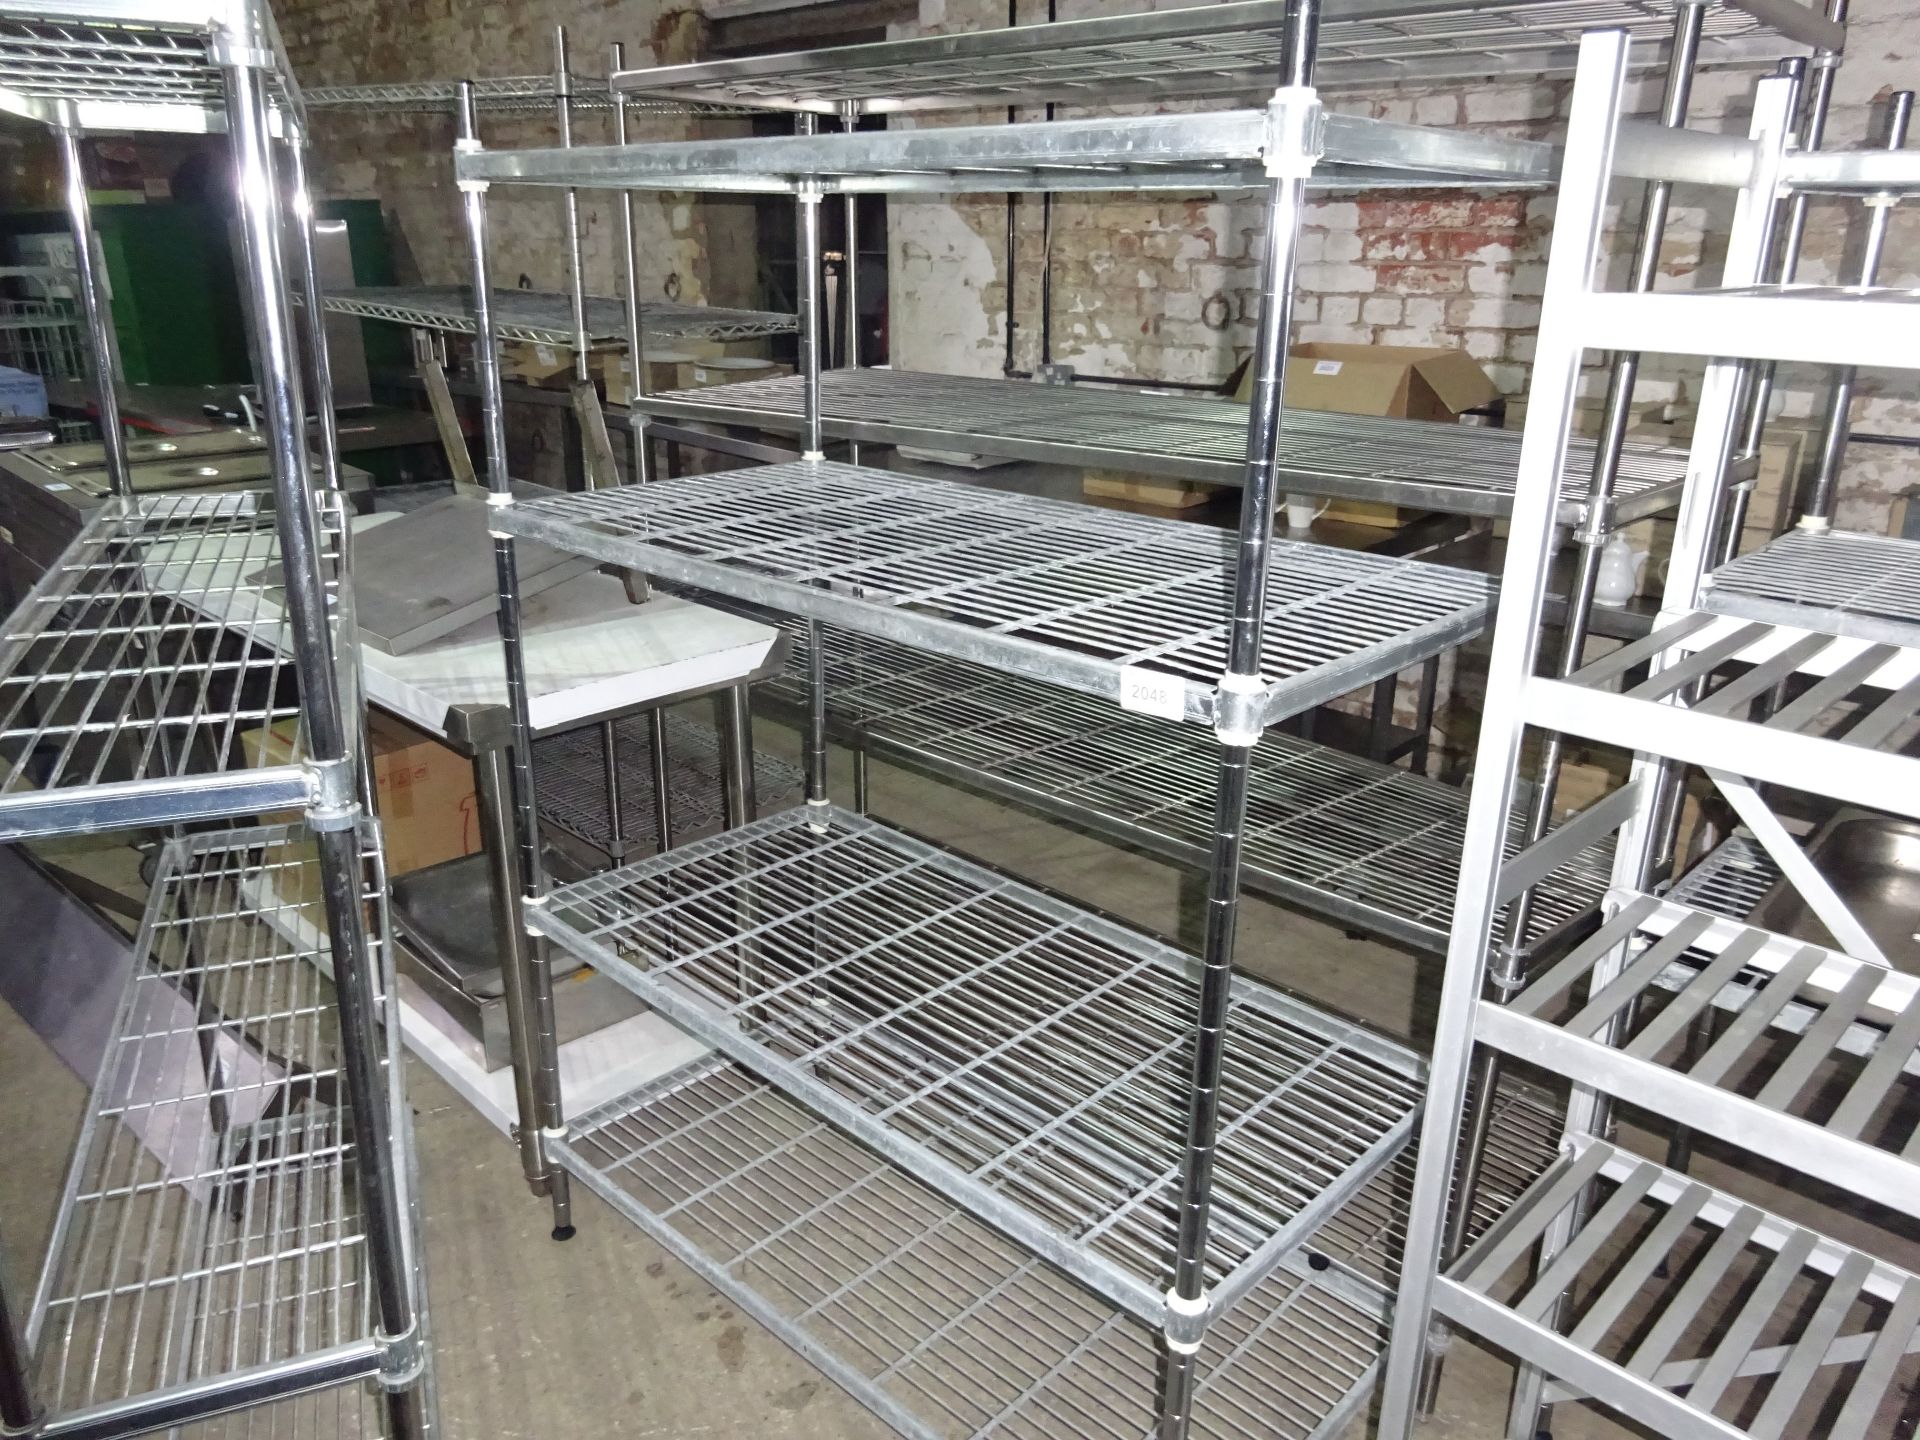 Four tier wire rack, width 120cms, depth 60cms and height 170cms.